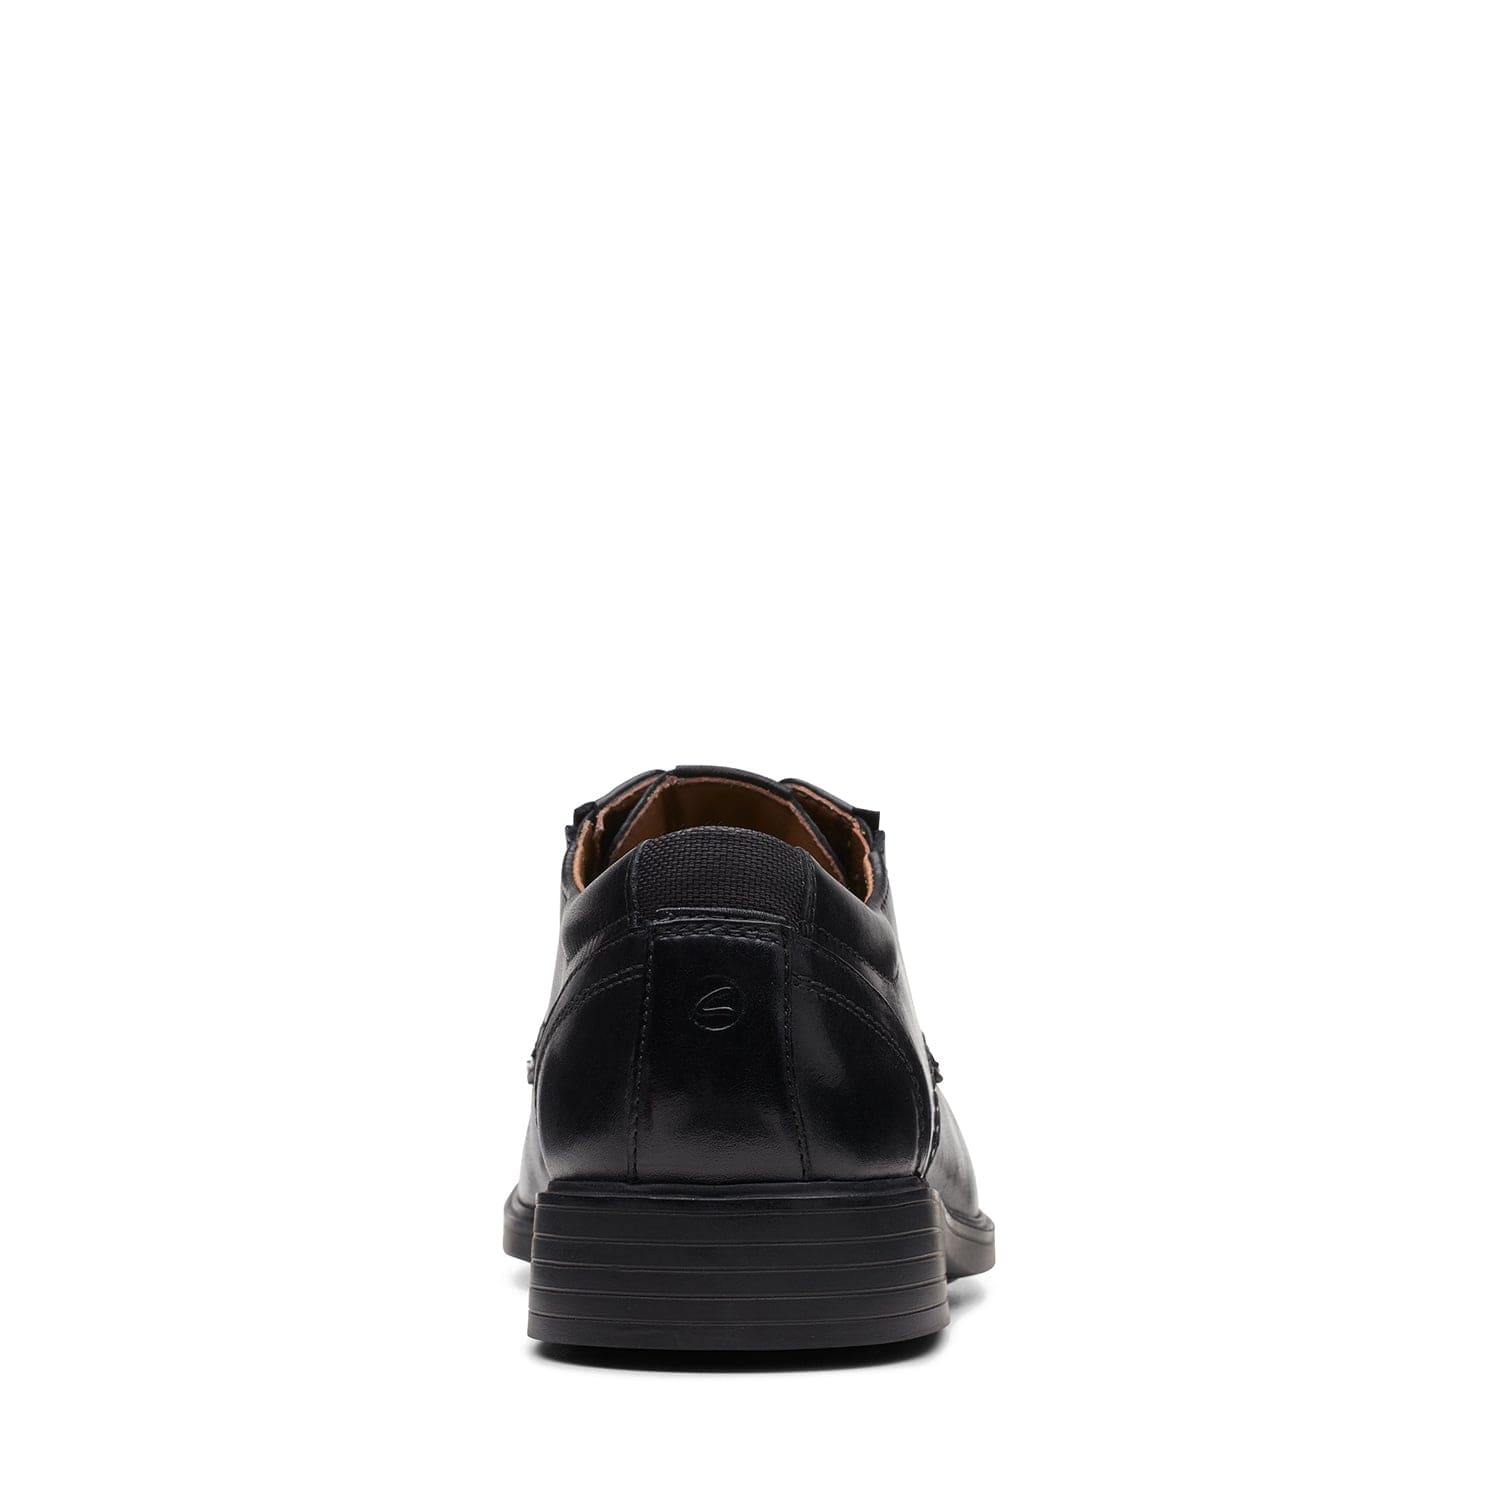 Clarks Clarkslite Low - Shoes - Black Leather - 261678928 - H Width (Wide Fit)